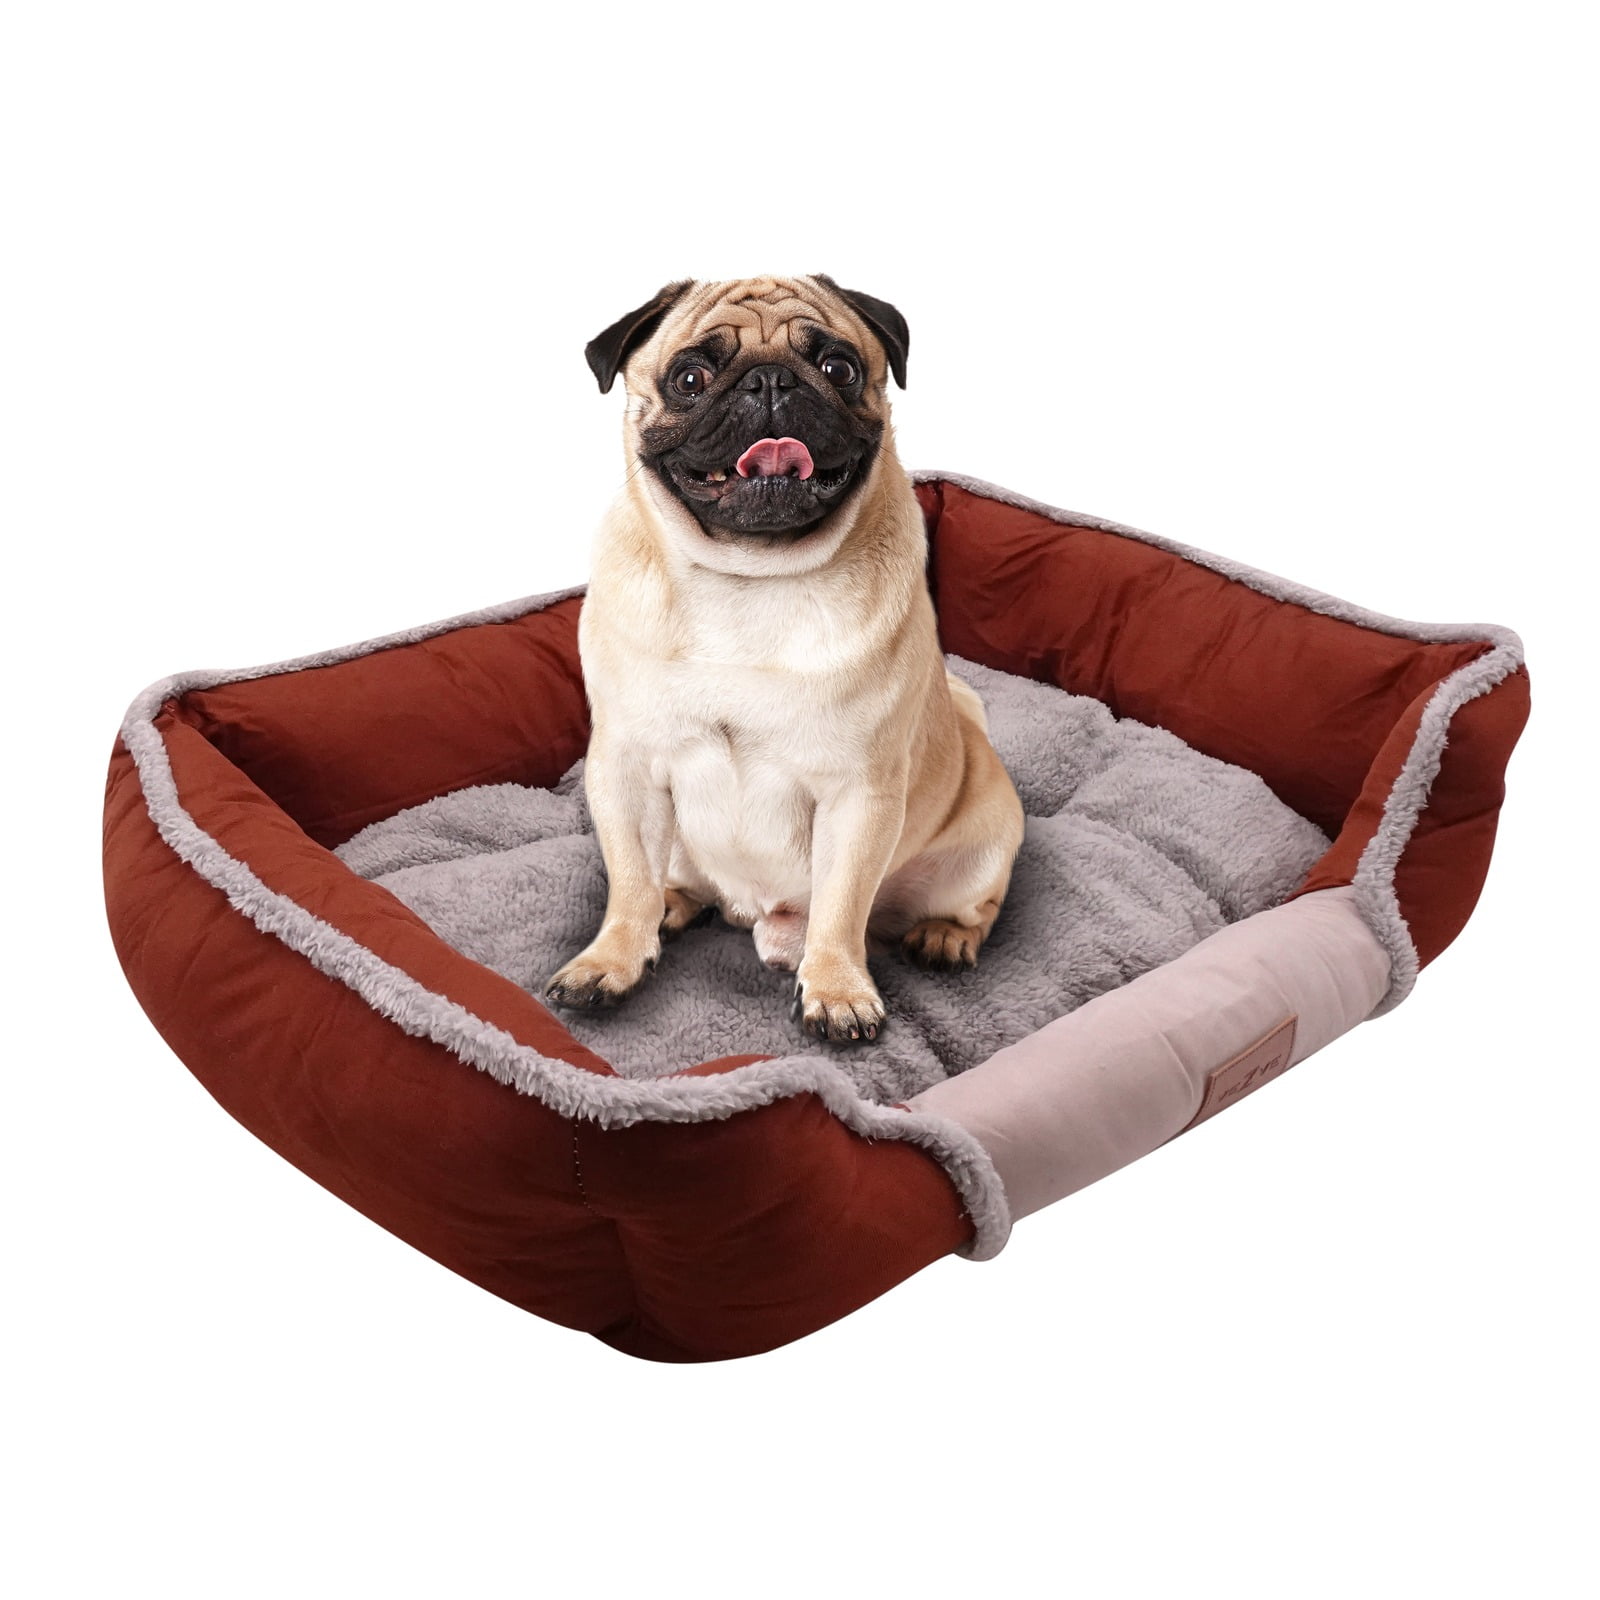 JOYELF Medium Memory Foam Dog Bed Replacement Cover for 31 x 22